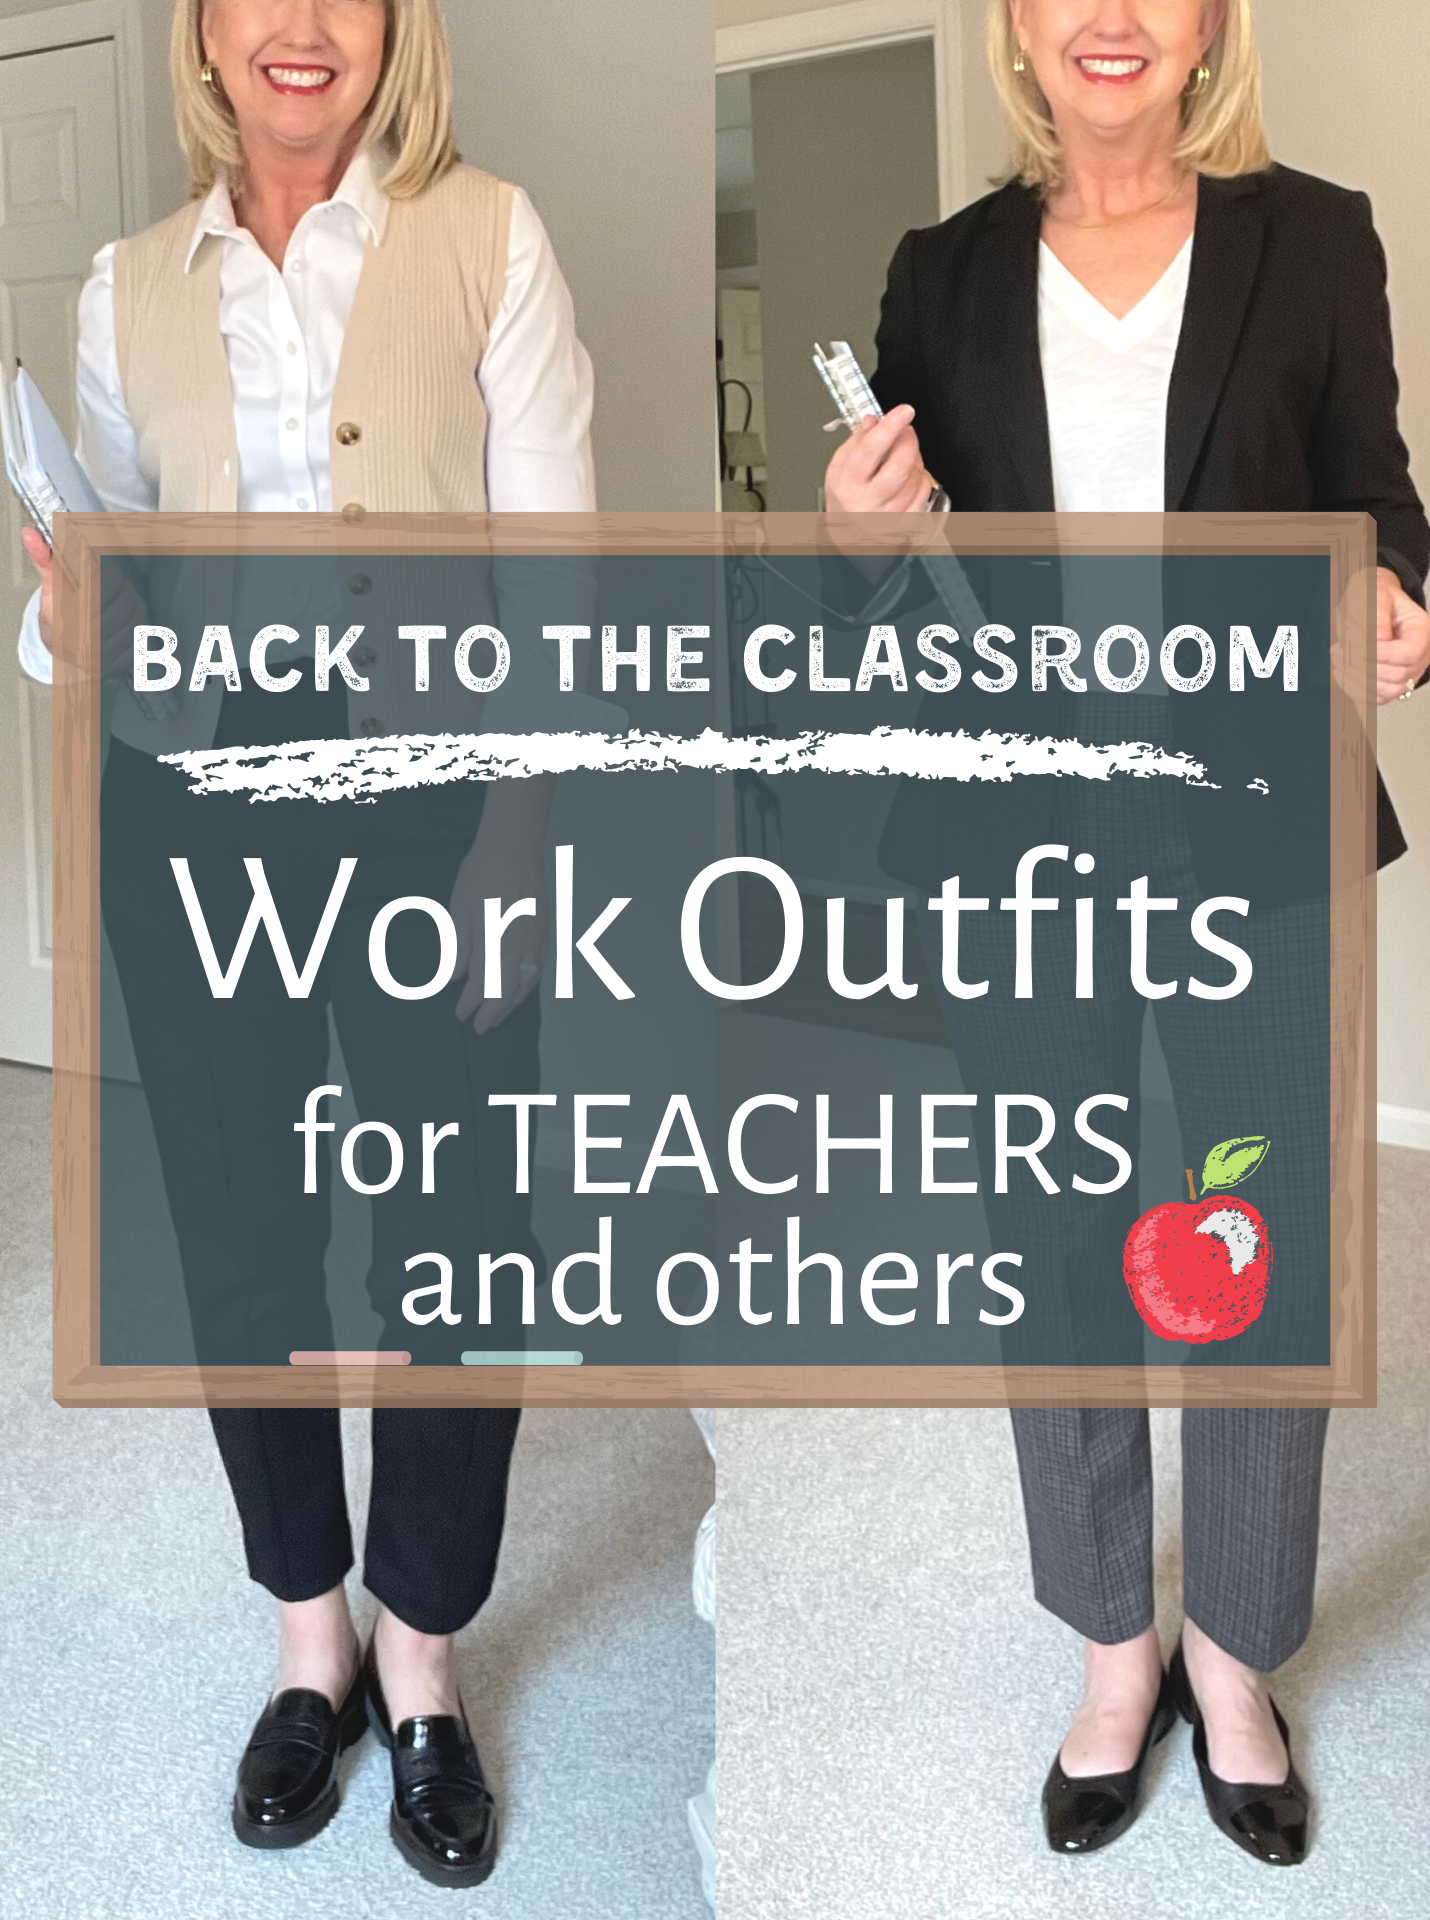 Back to the Classroom Work Outfits for TEACHERS and others